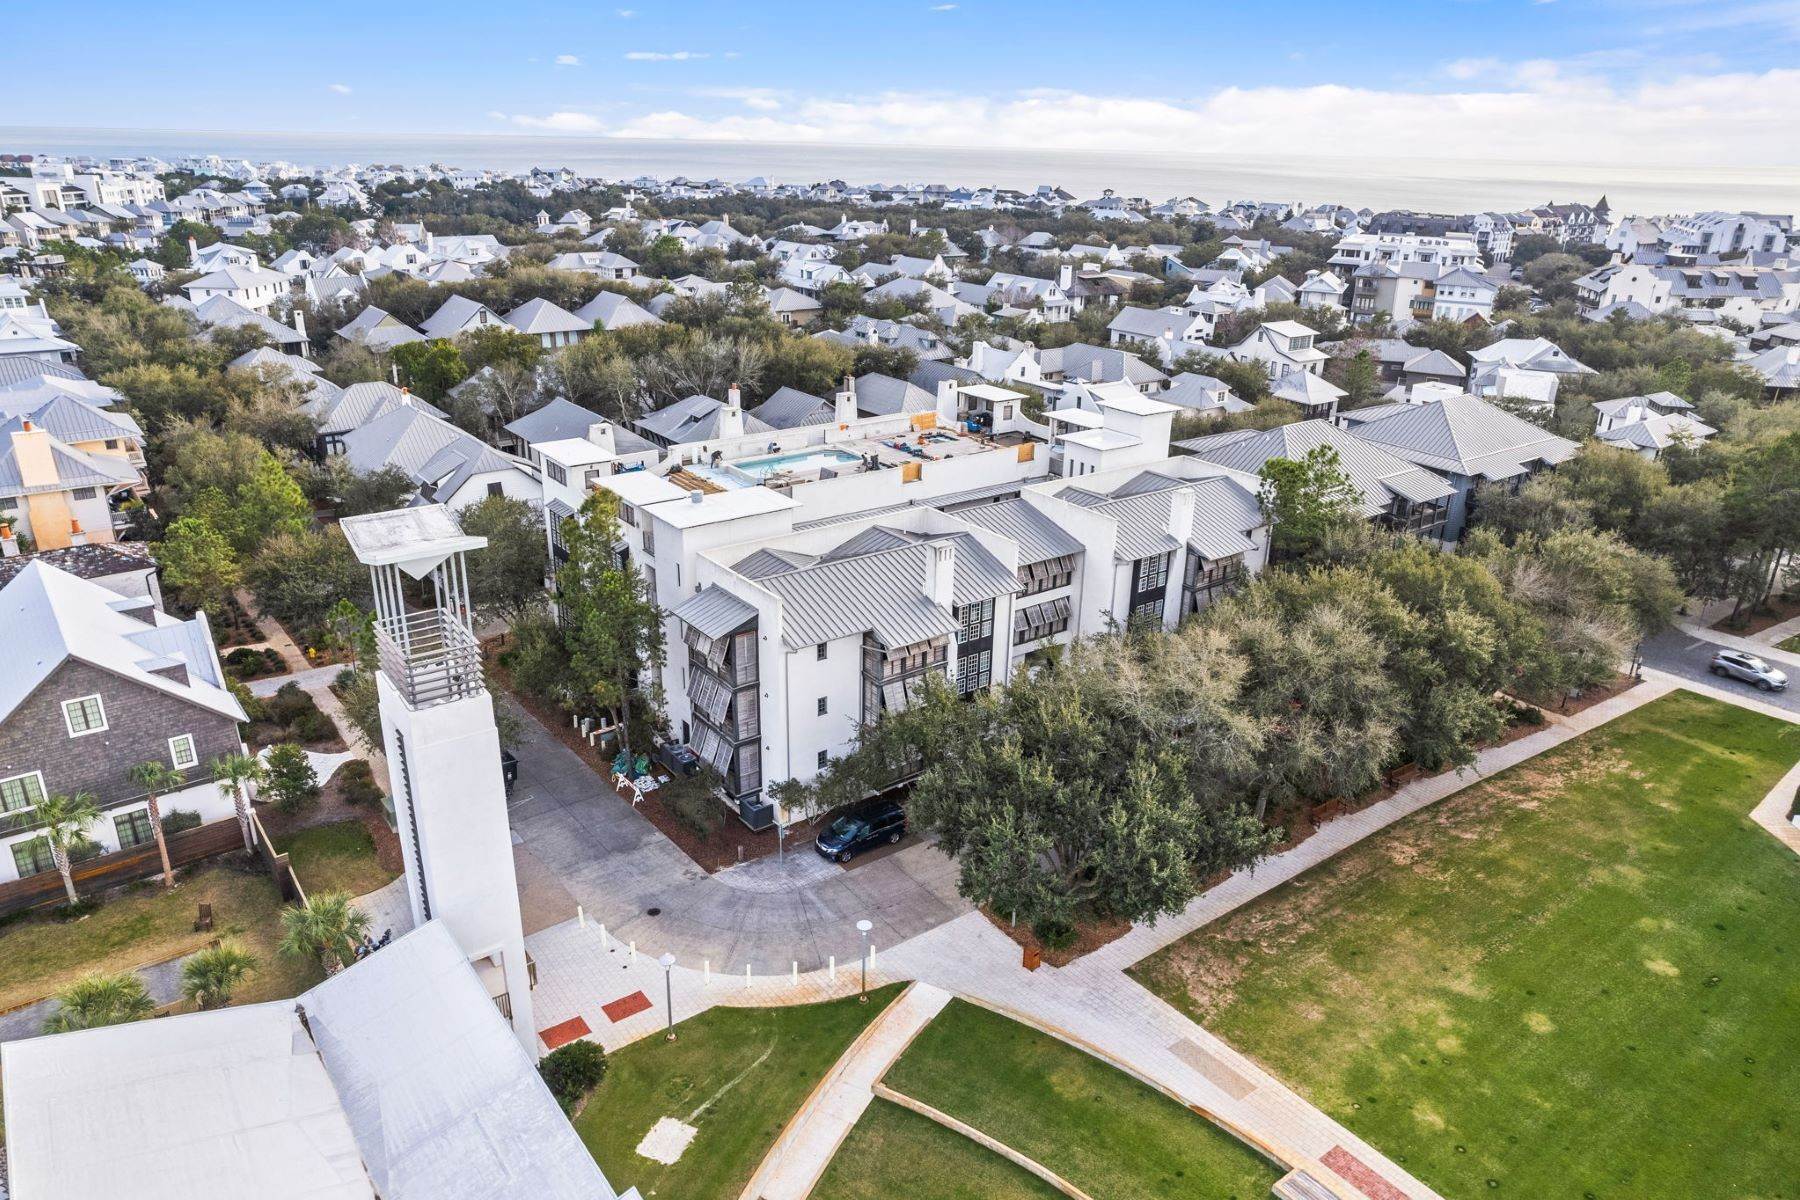 Fractional Ownership Property for Sale at Fractional Ownership In 30A Community With Amenities 136 Georgetown Avenue, 3C Rosemary Beach, Florida 32461 United States